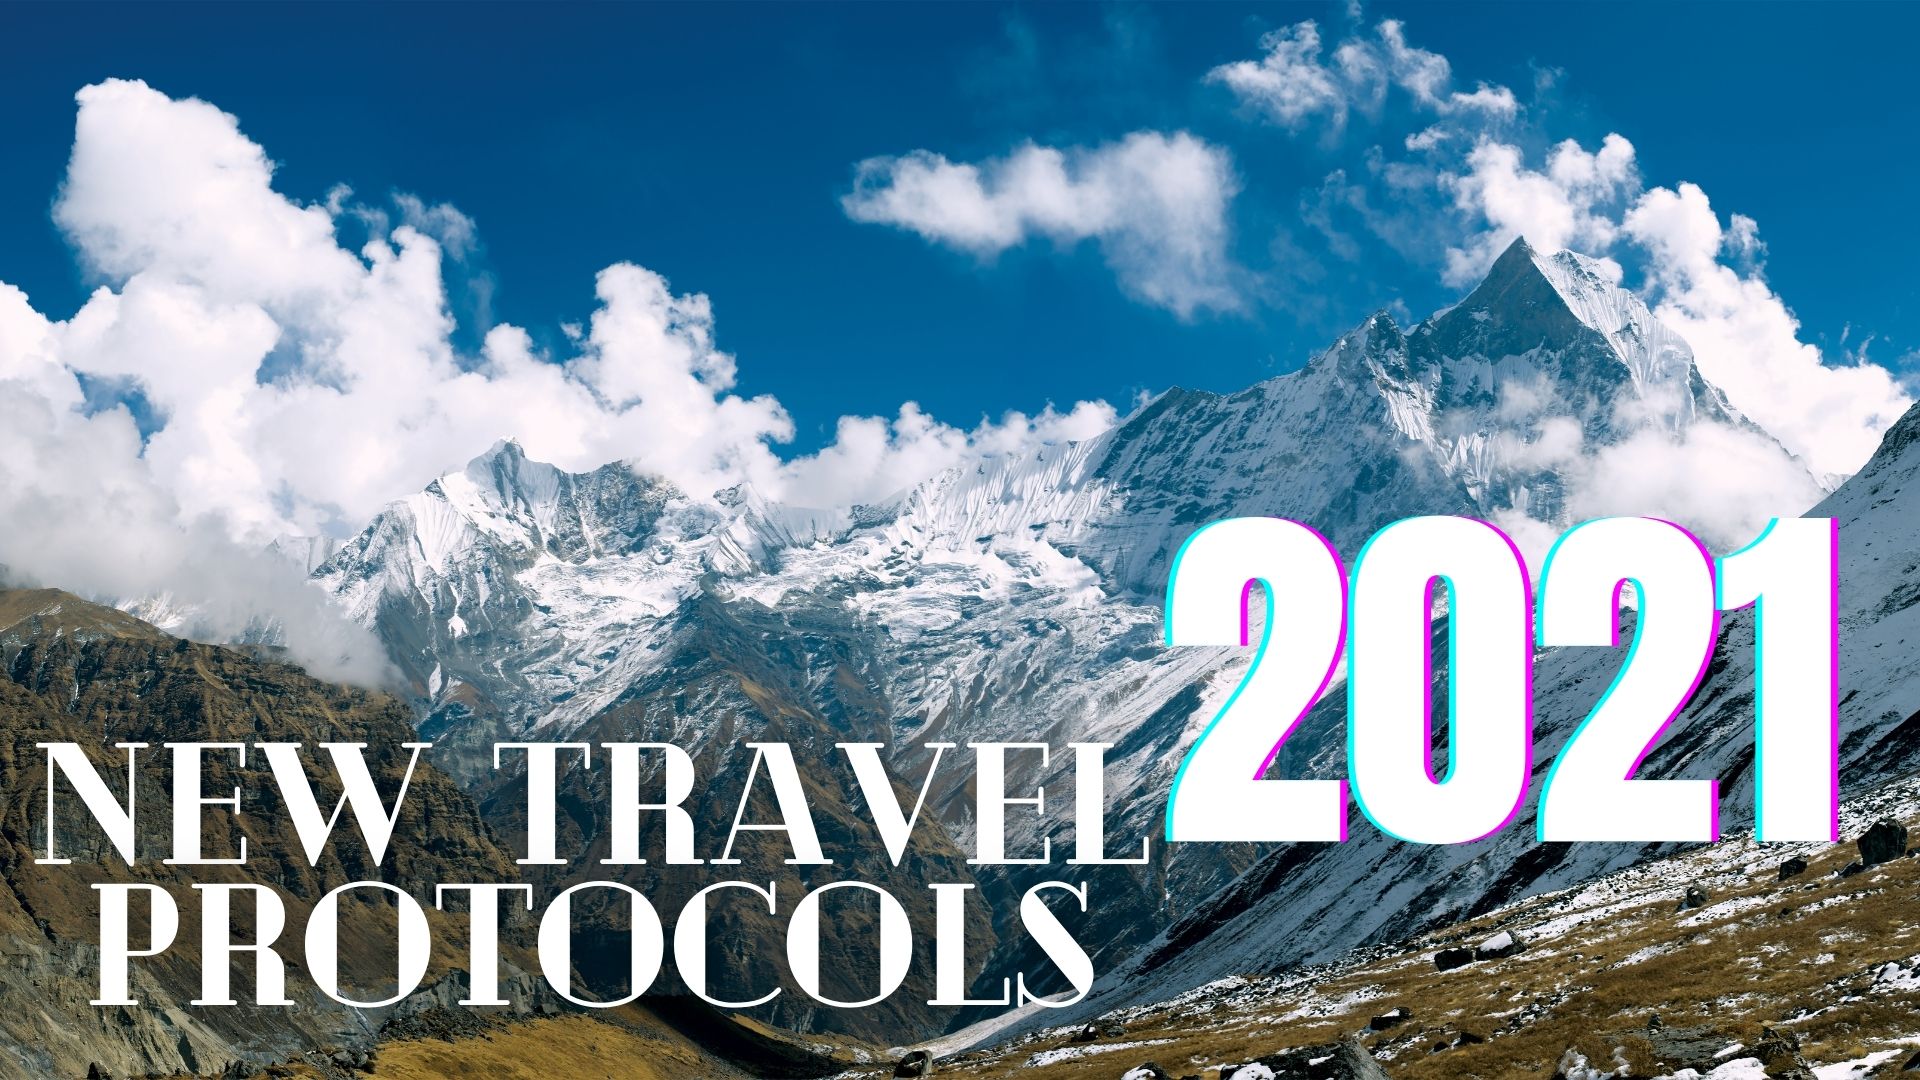 Updated travel protocols for travelers coming to Nepal